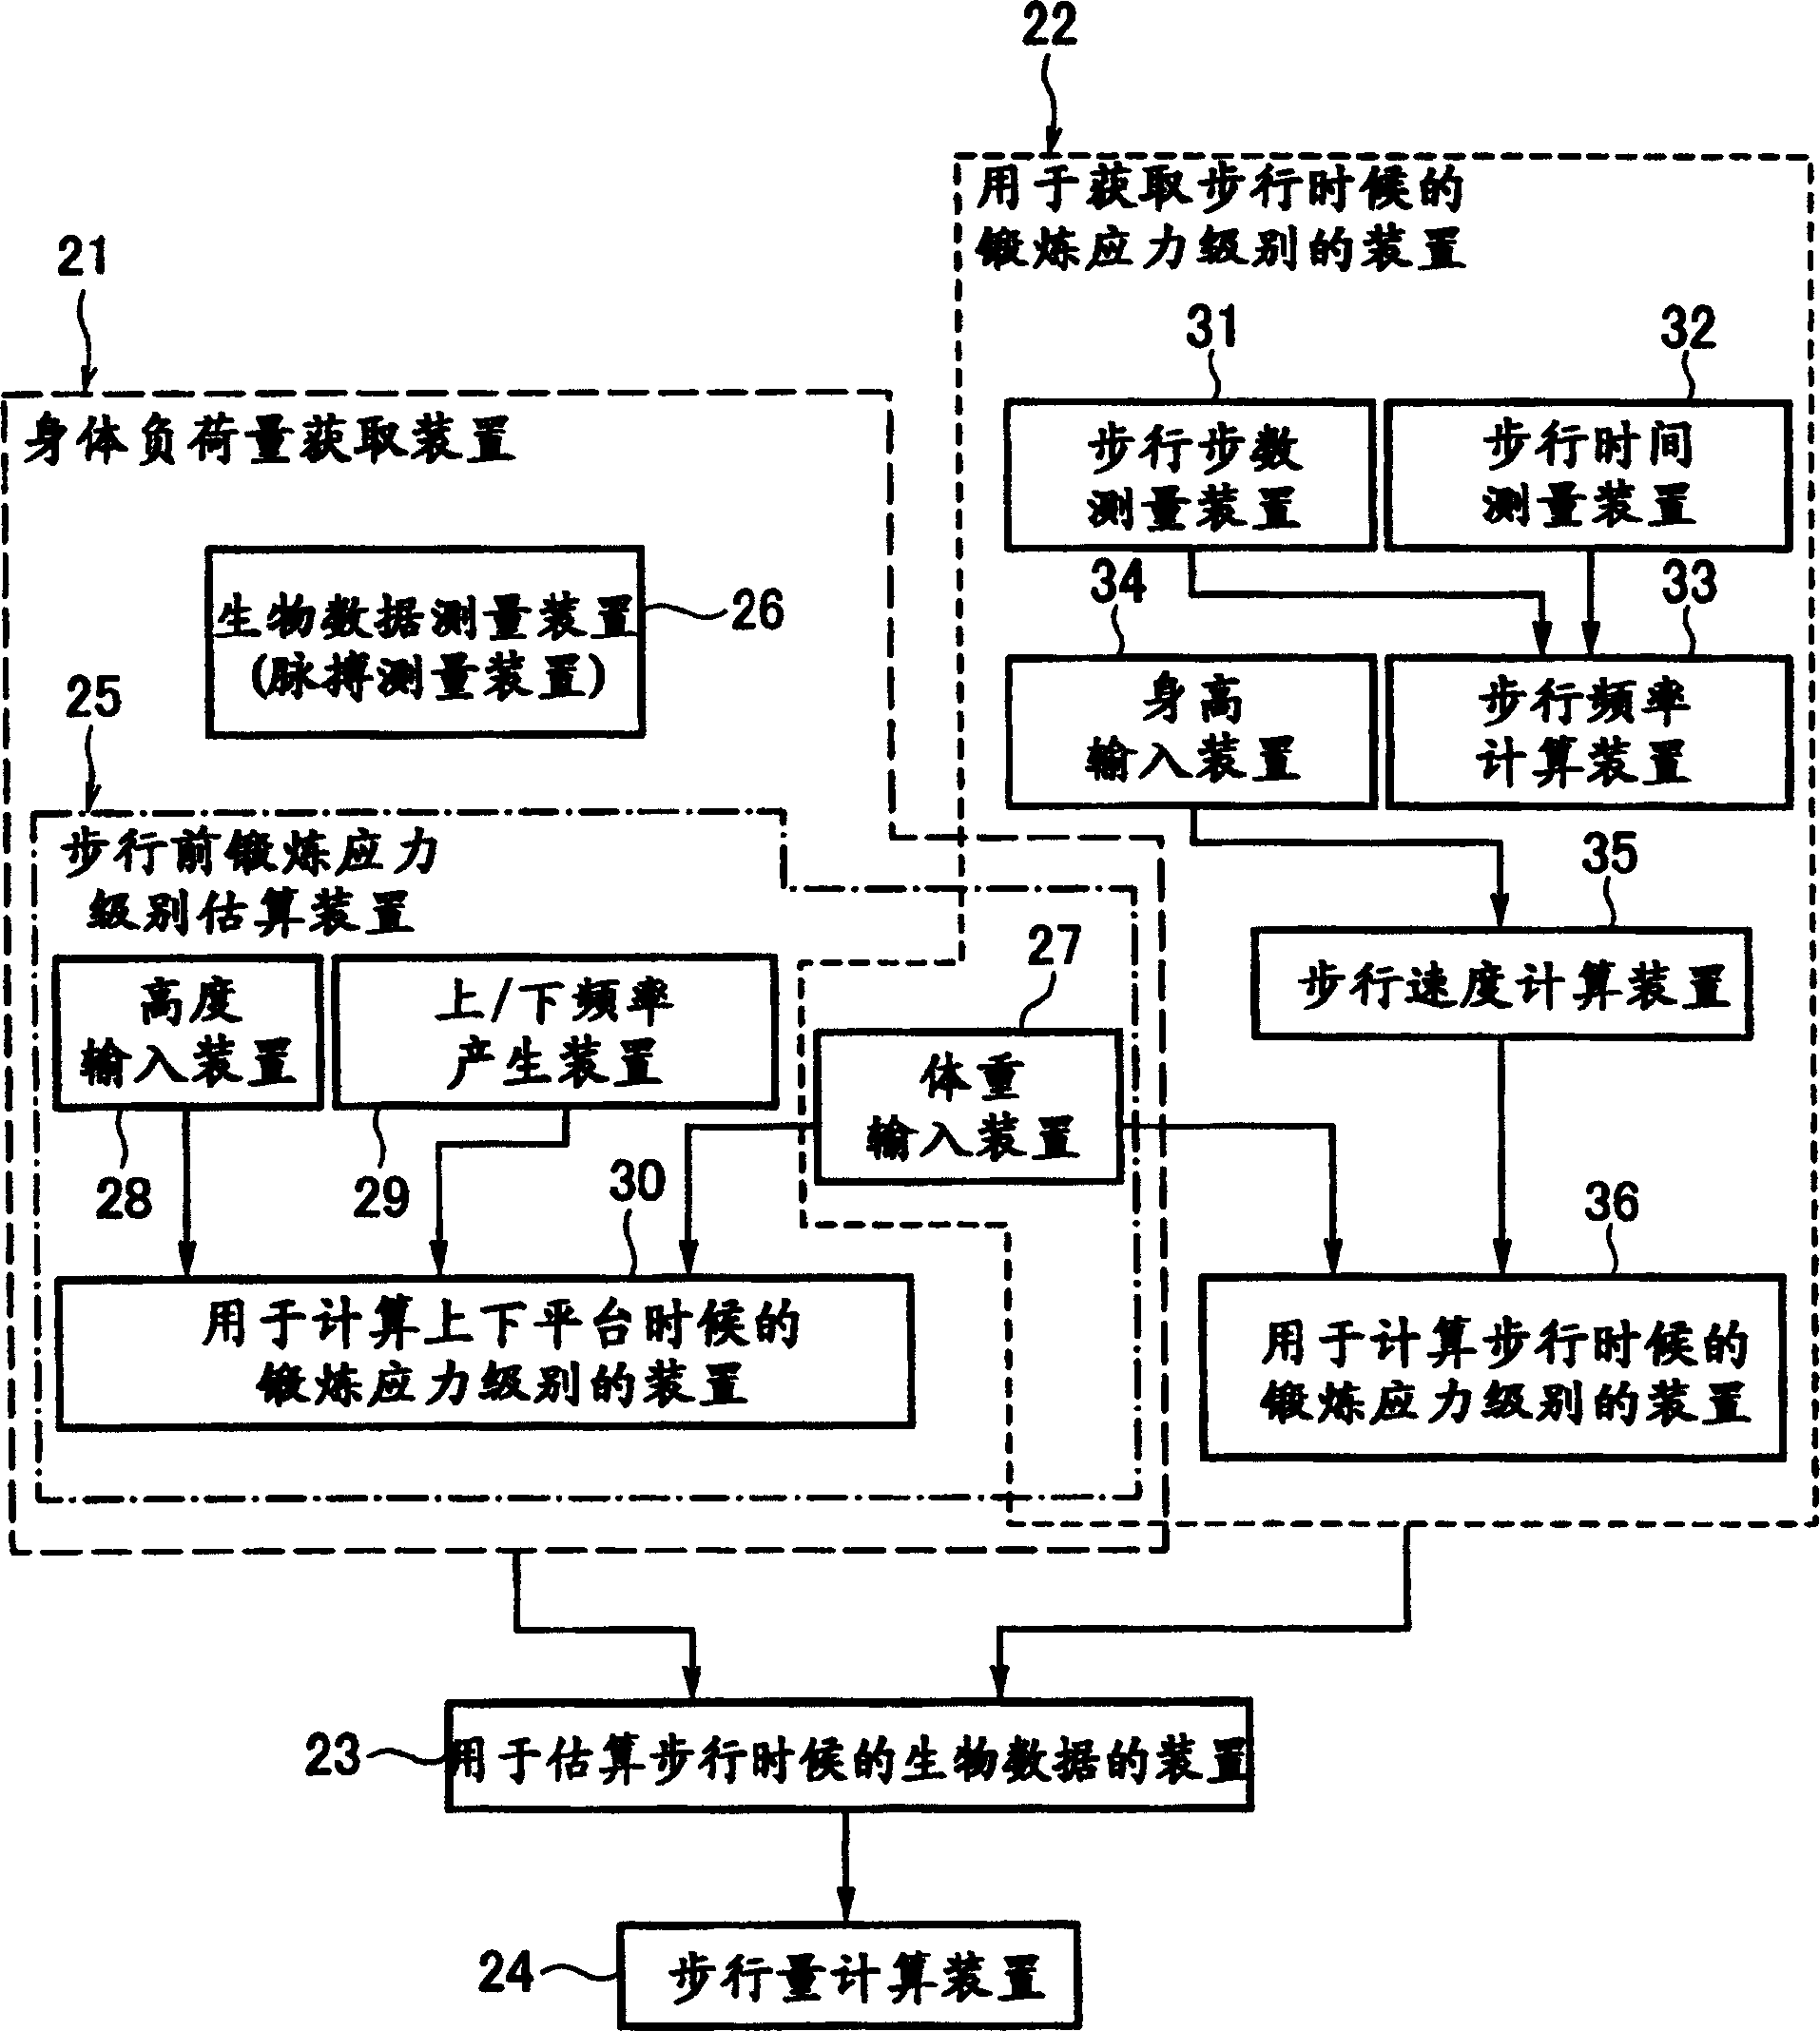 System for computing biological data for walk and walk frequency meter